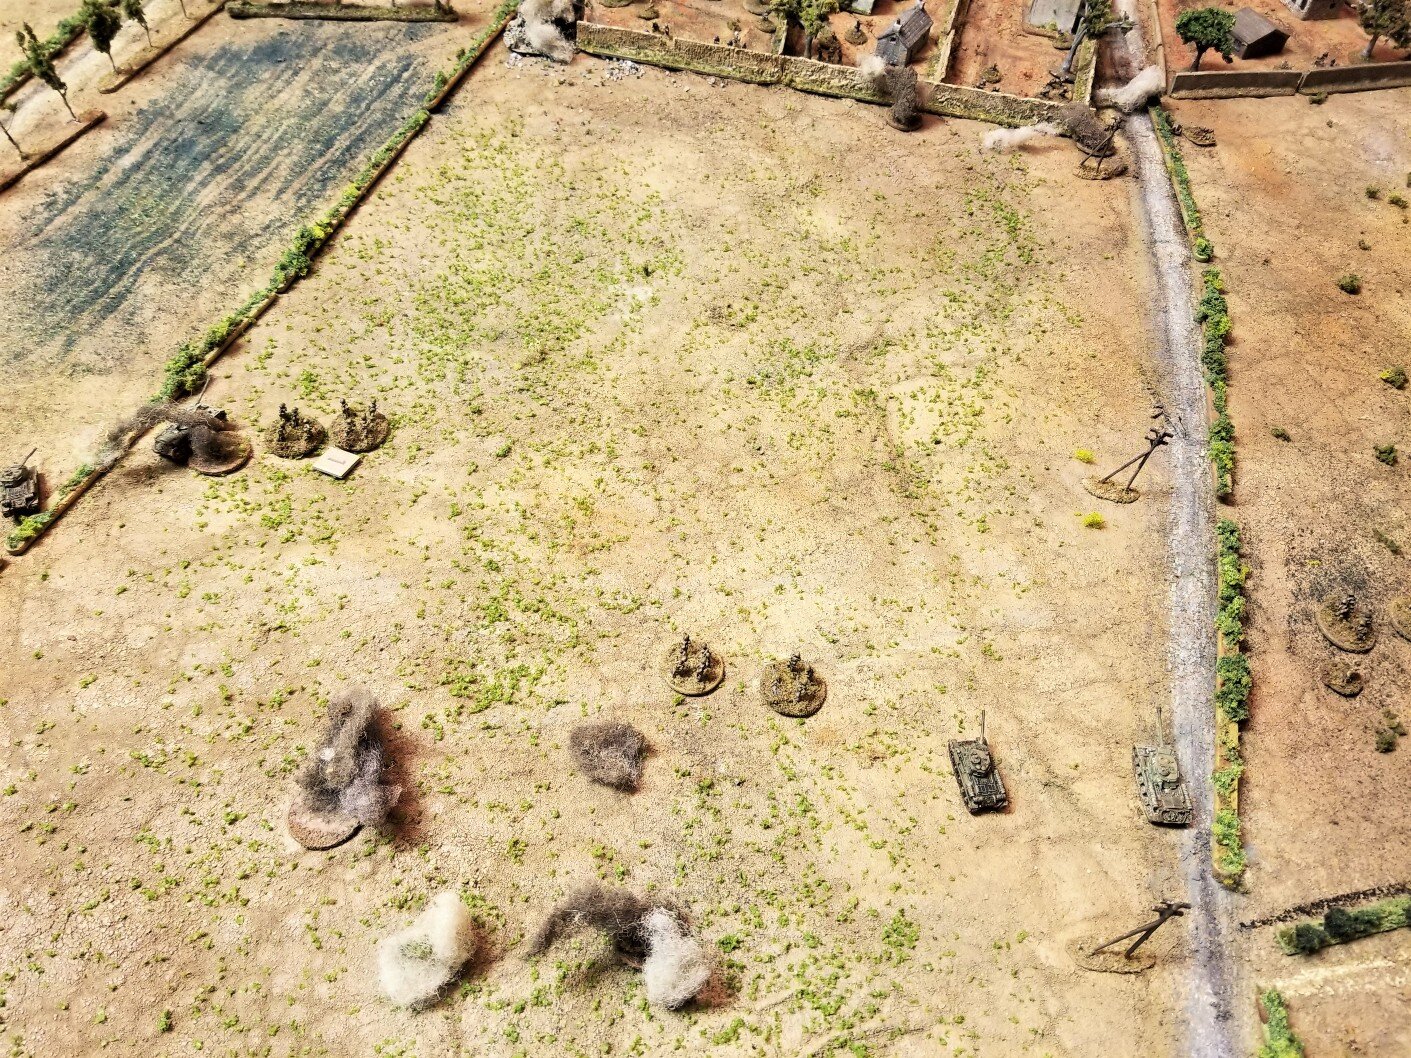 Mortars just missing bulk of the attackers